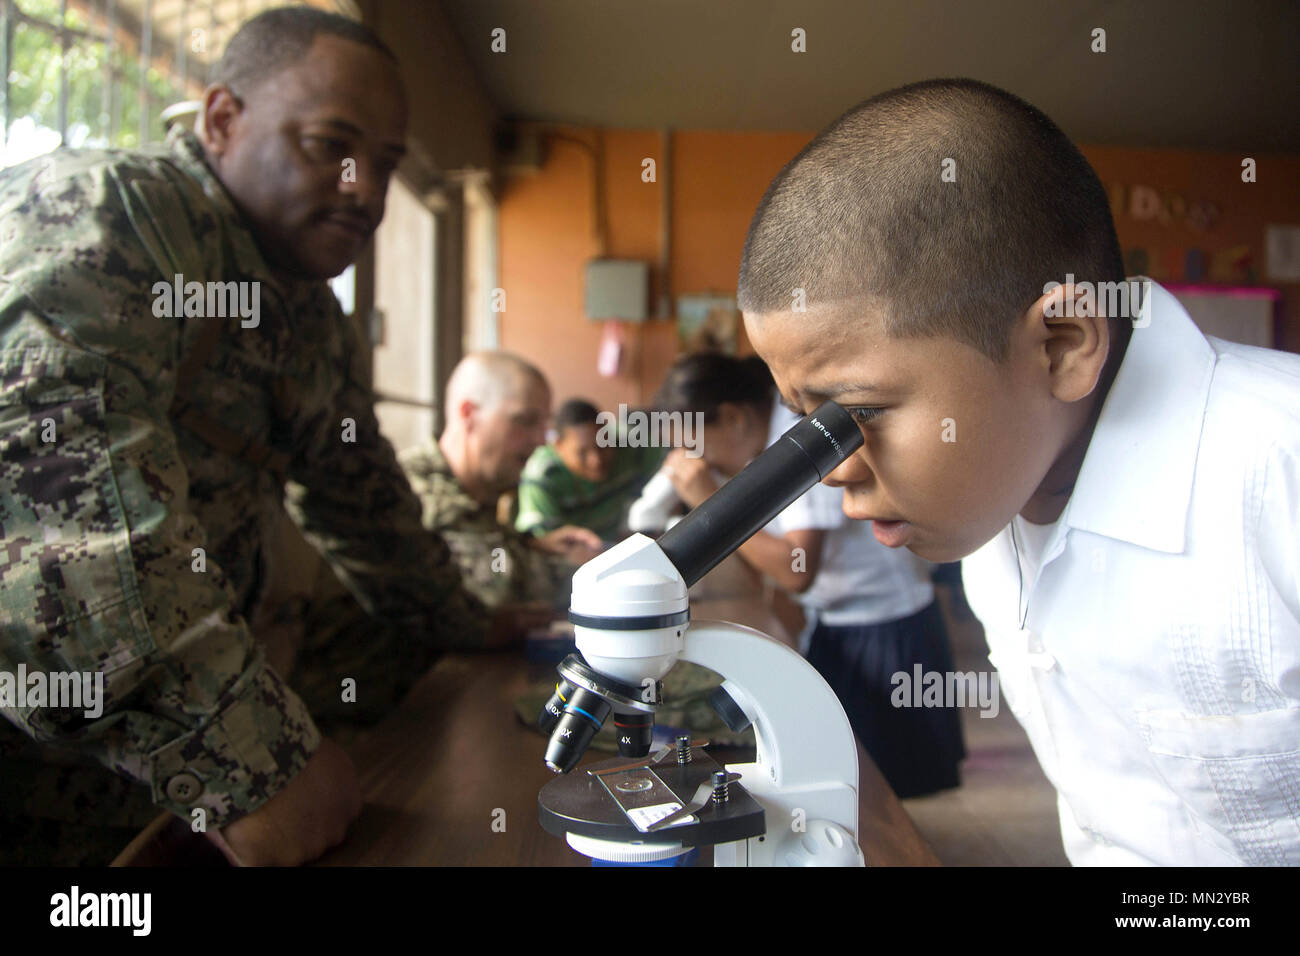 170823-A-QE286-0029 AGUAN, Honduras (August 23, 2017) U.S. Navy Hospital Corpsman 1st Class Dominic Ladmirault, assigned to Navy Entomology Center of Excellence, helps a boy examine an insect through a microscope at Escuela Lidia Handal, during a Southern Partnership Station 17 community relations project (COMREL). SPS 17 is a U.S. Navy deployment executed by U.S. Naval Forces Southern Command/U.S. 4th Fleet, focused on subject matter expert exchanges with partner nation militaries and security forces in Central and South America. (U.S. Army photo by SPC Judge Jones/Released) Stock Photo